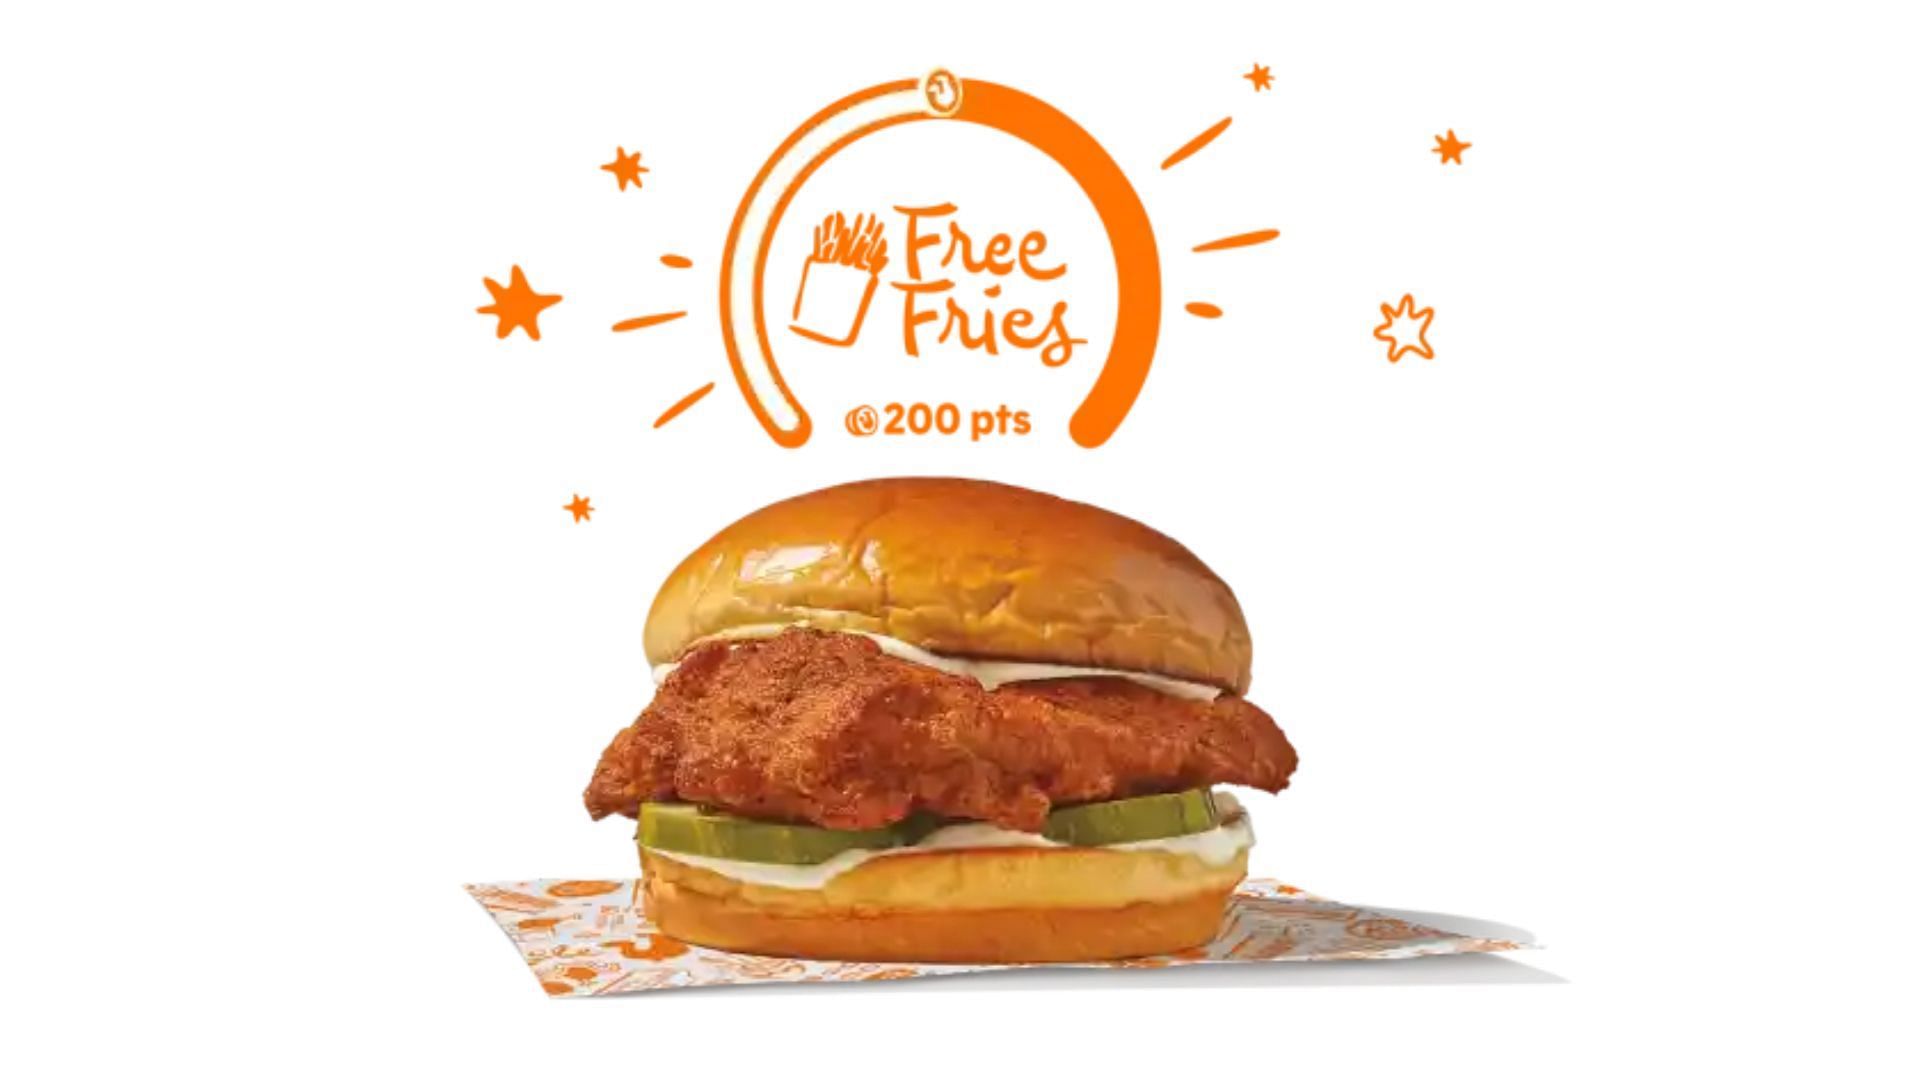 Promotional image of free fries offer for customers who get the Blackened Chicken Sandwich (Image via Popeyes)